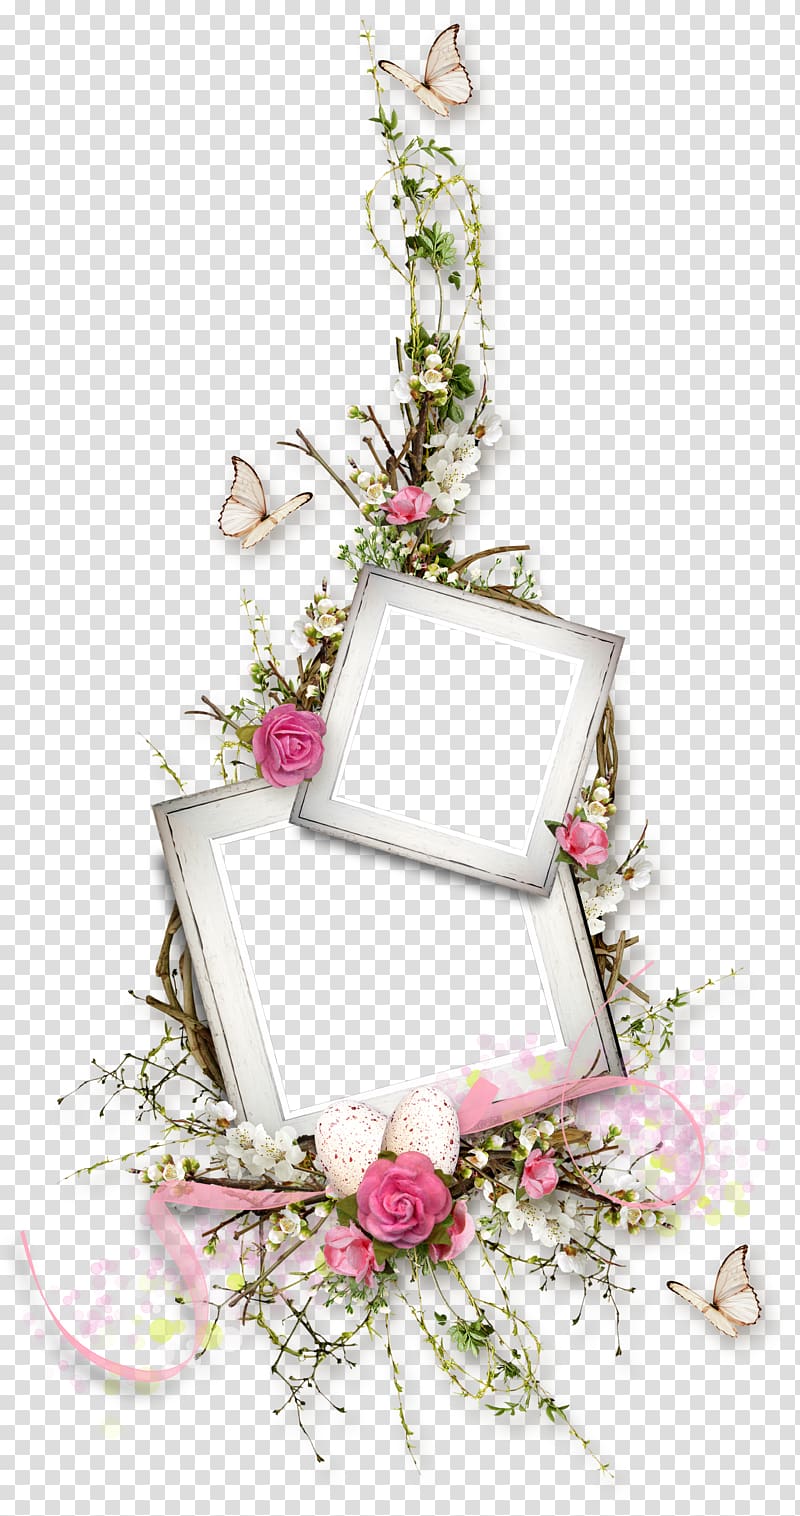 Pink flowers Floral design, Butterfly flower vine border, two white frames surrounded by pink and white flowers transparent background PNG clipart